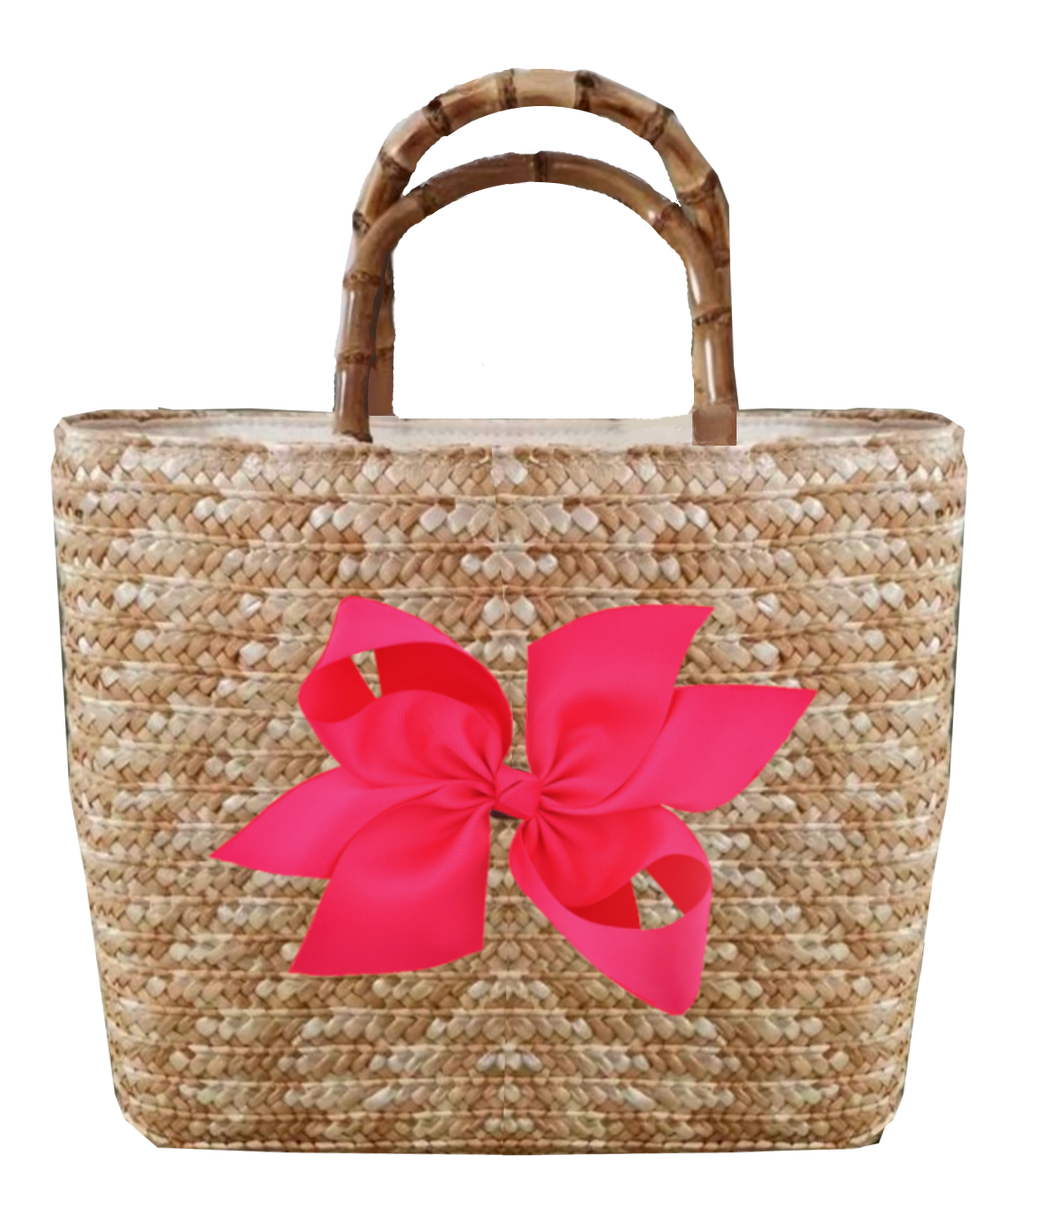 Sankaty Straw Tote with Interchangeable Bow - Hot Pink